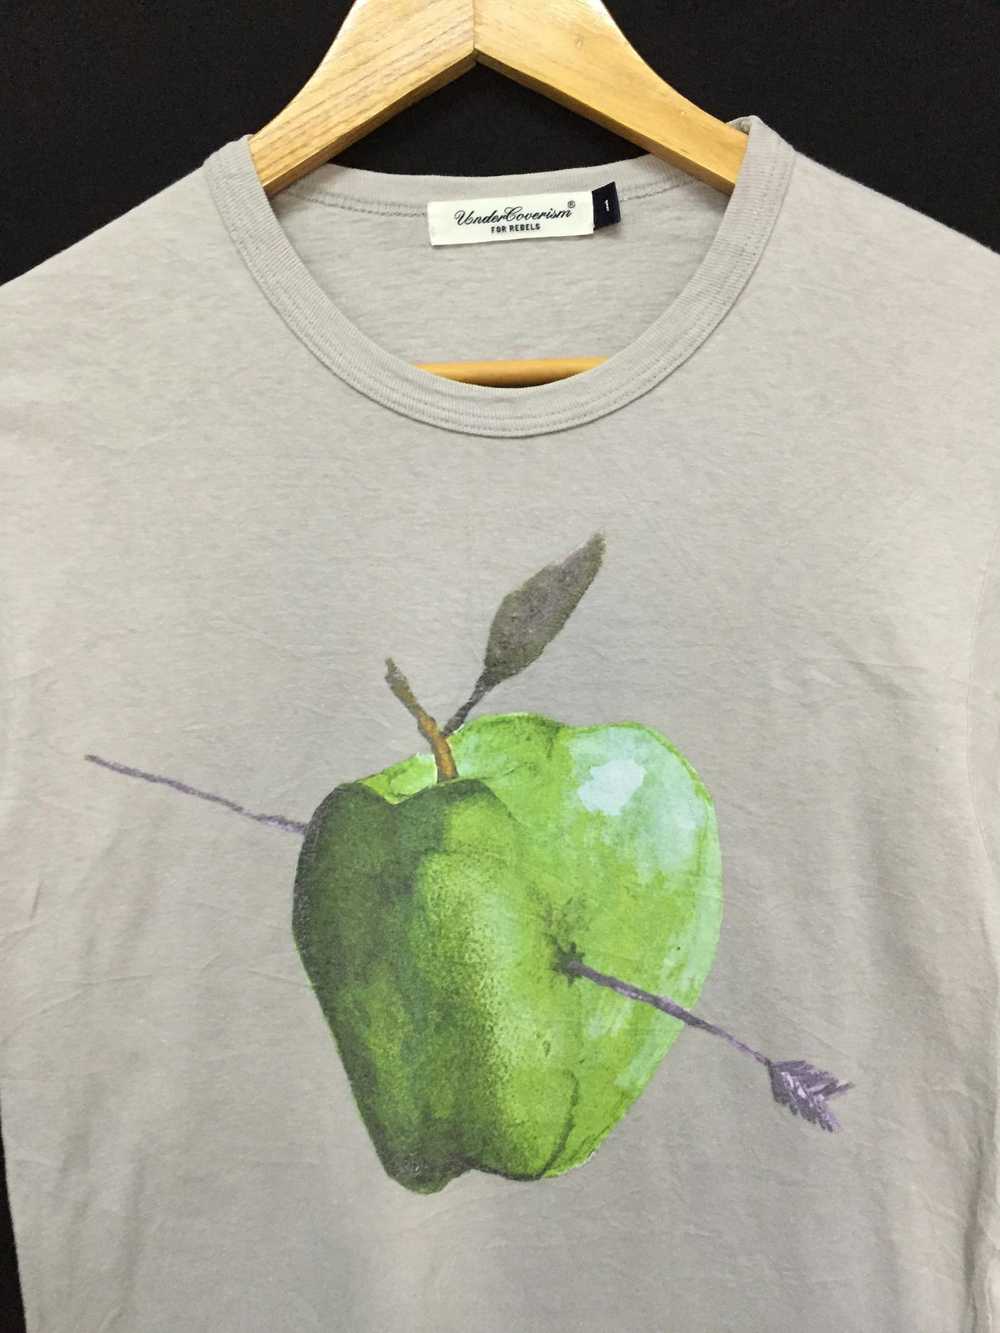 Undercover Undercover target apple tee - image 3